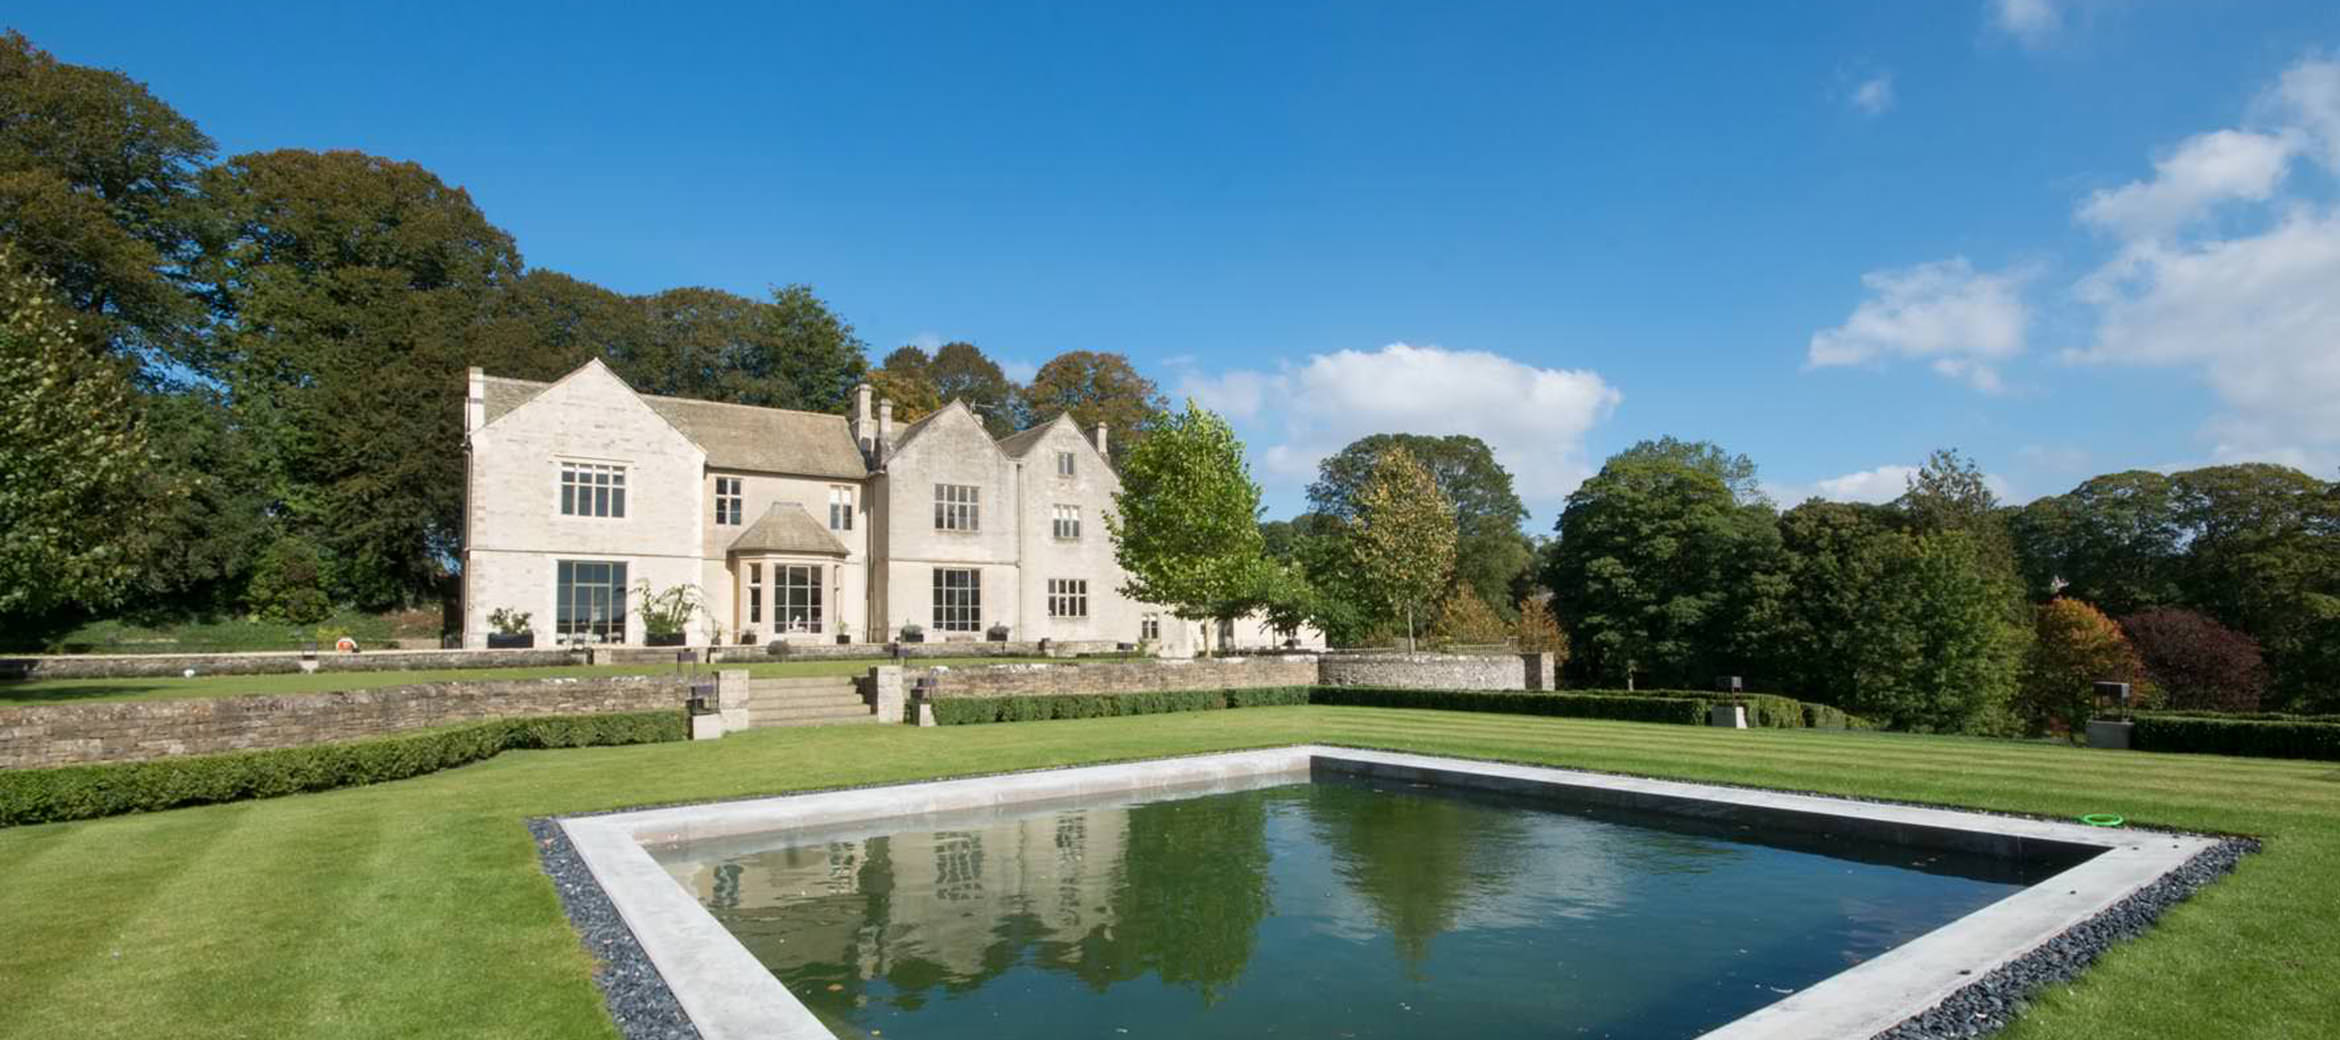 luxury-cotswold-august-house-1004-lcr